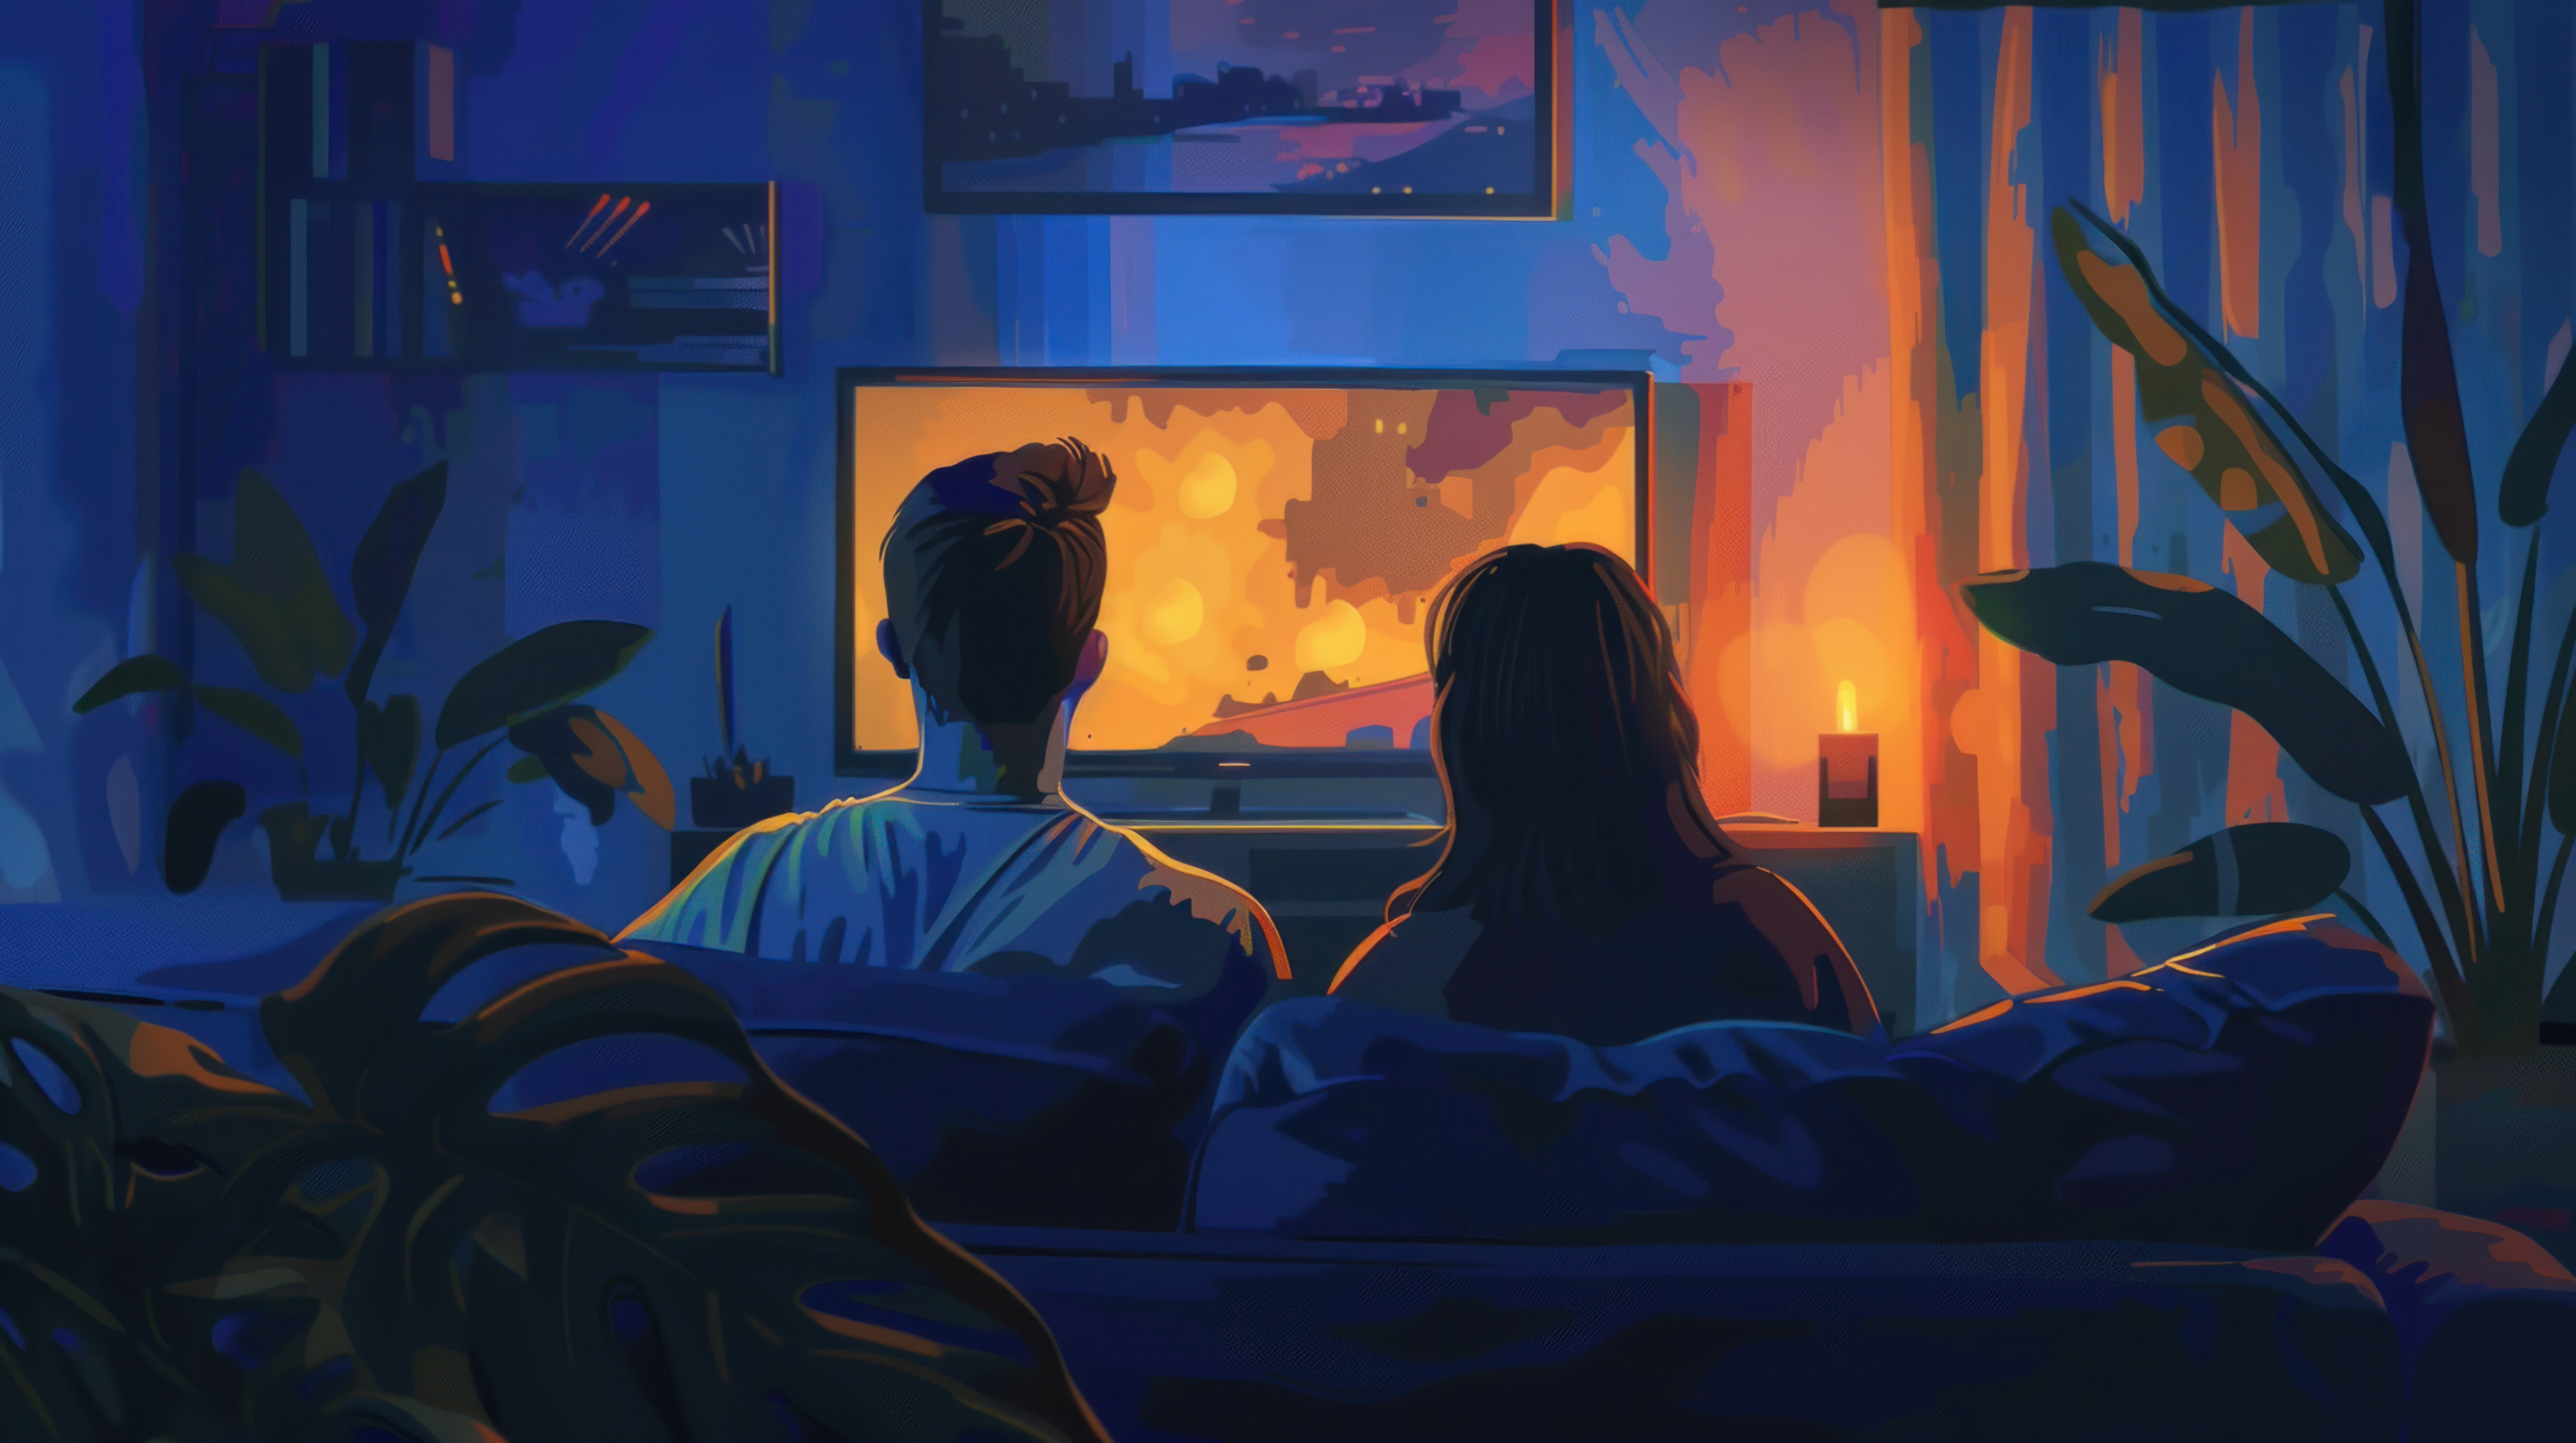 illustration showing a couple sitting on a couch together watching TV